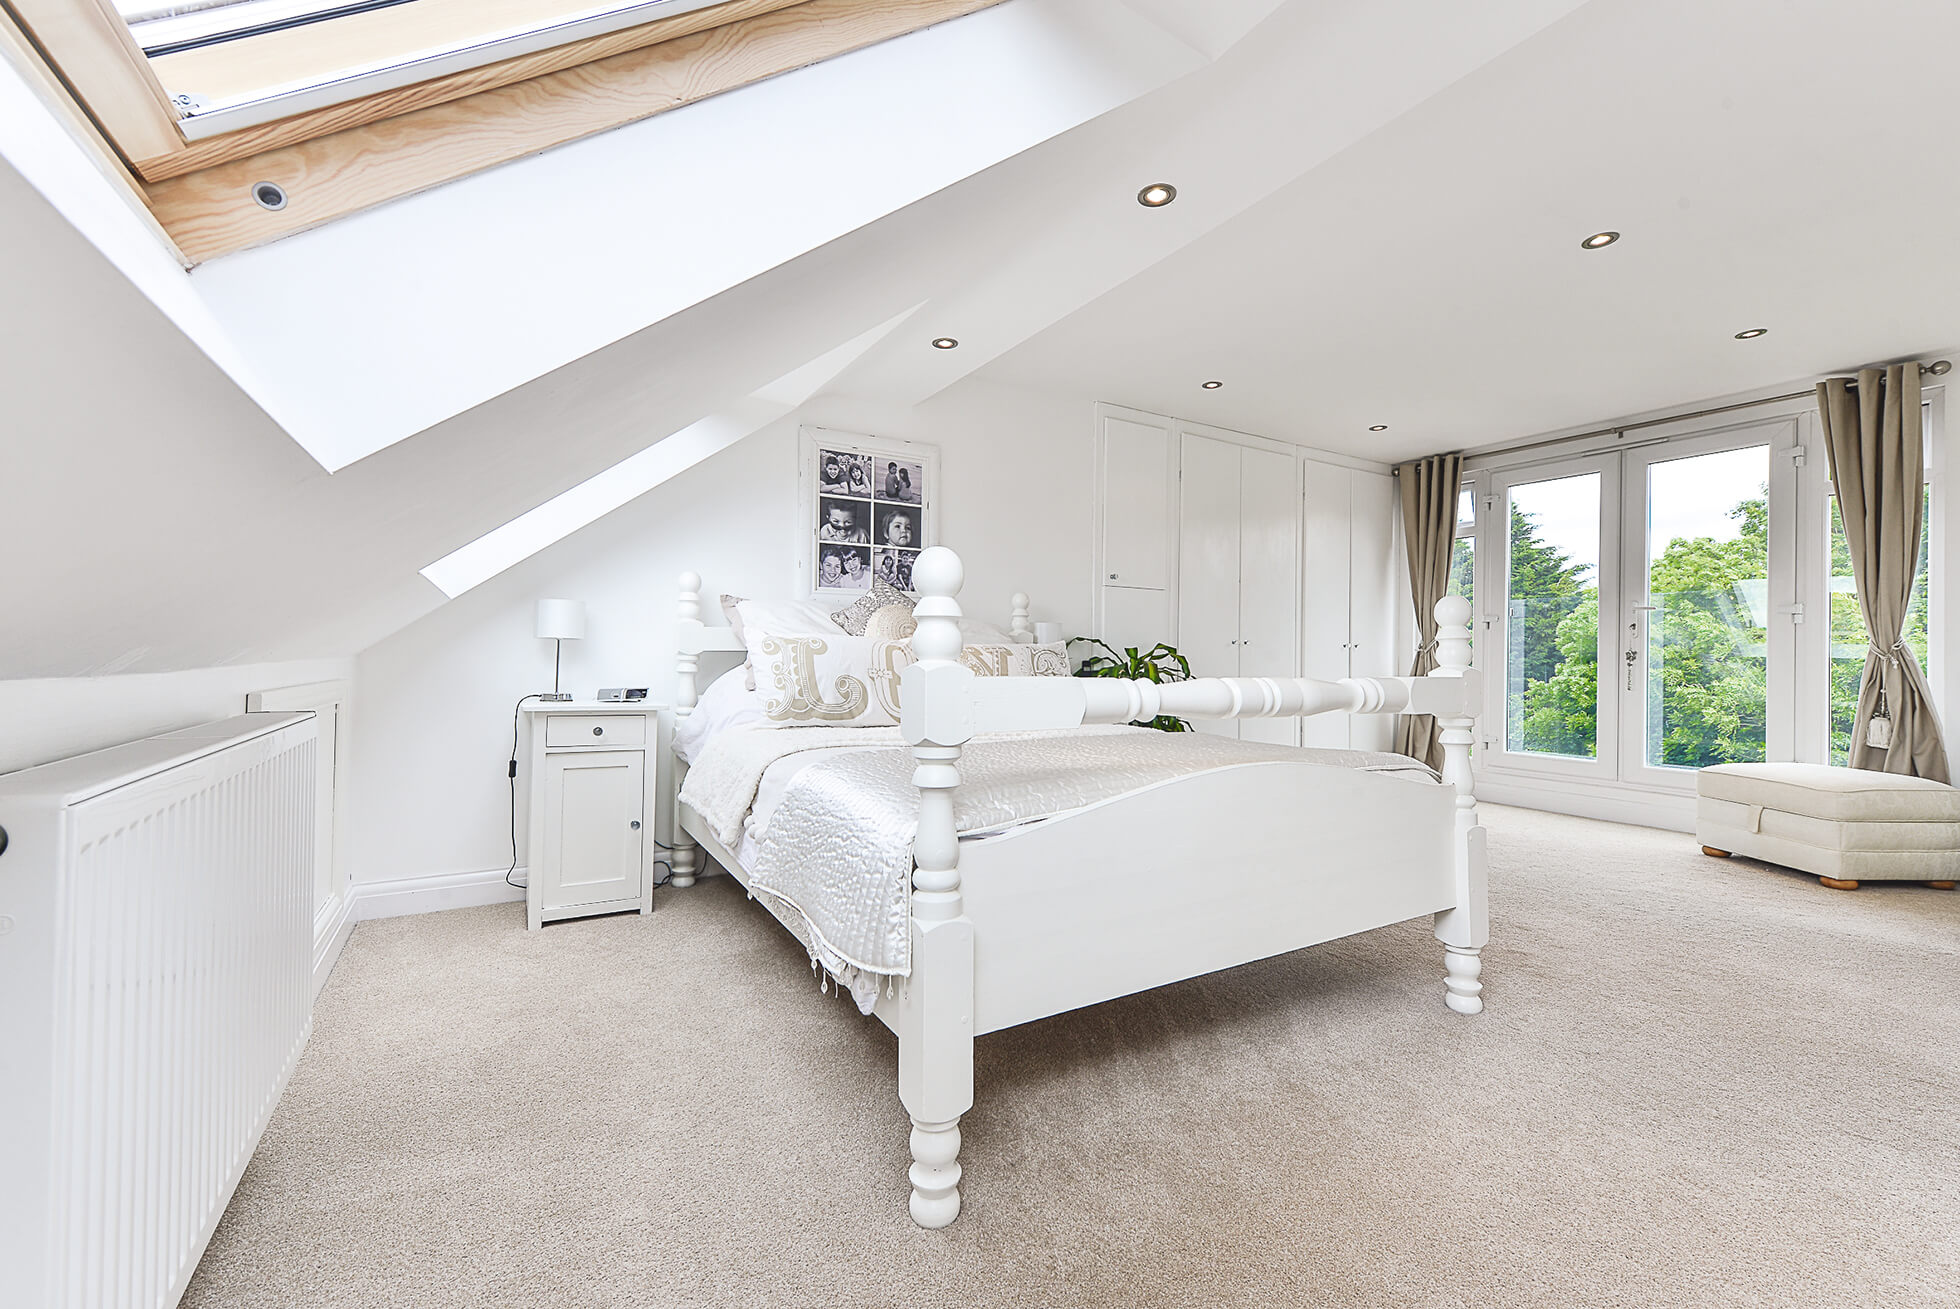 Do you have a question about converting your Loft in Gosmore? Here are the most popular questions asked by our clients.